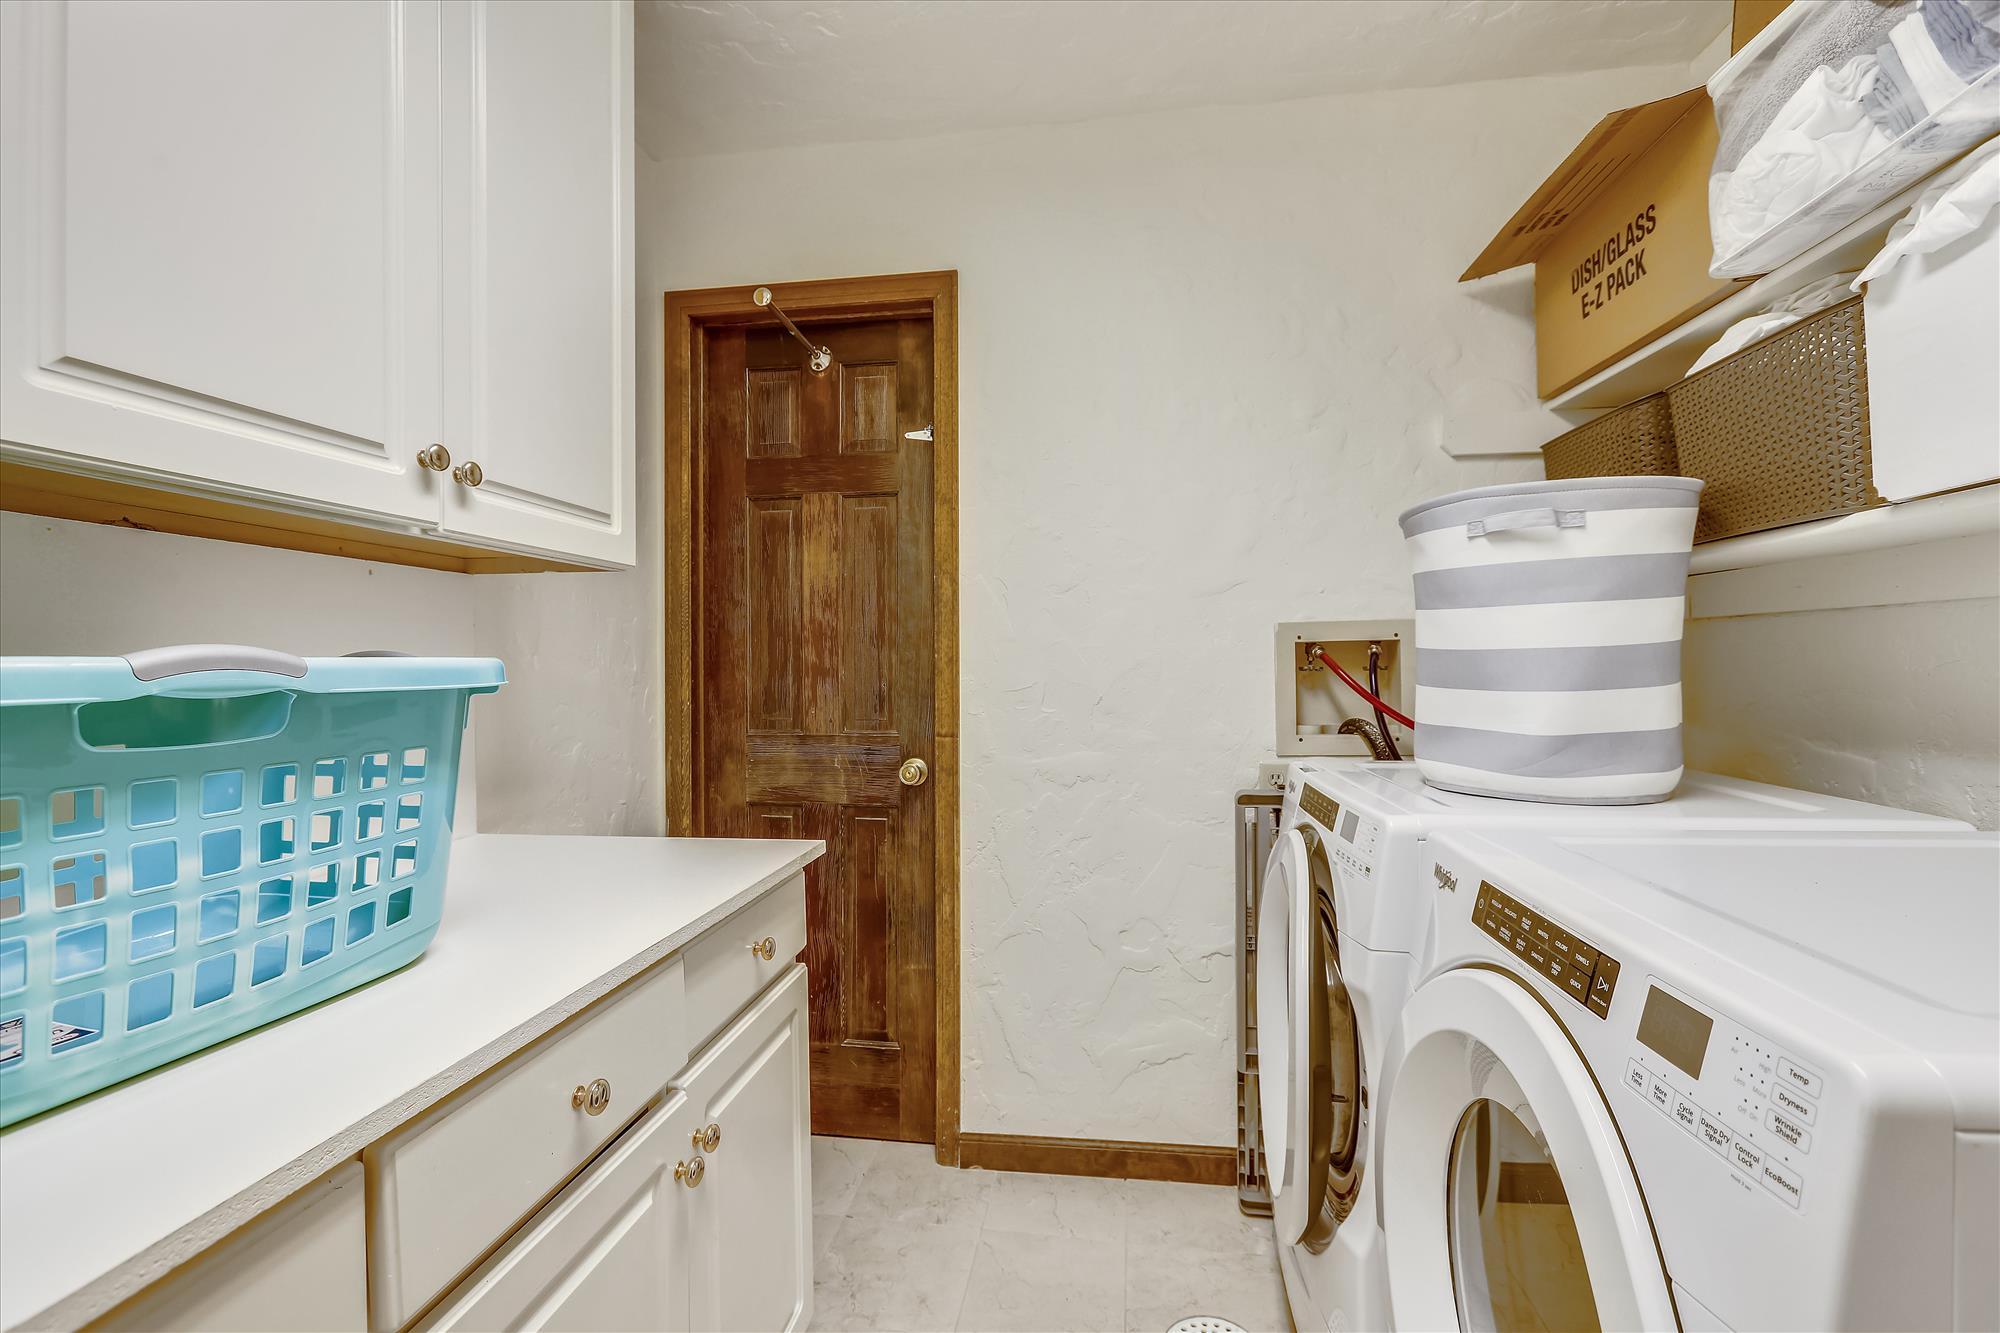 Laundry room located on the bottom floor with full size washer and dryer - Calderon De La Breck Breckenridge Vacation Rental